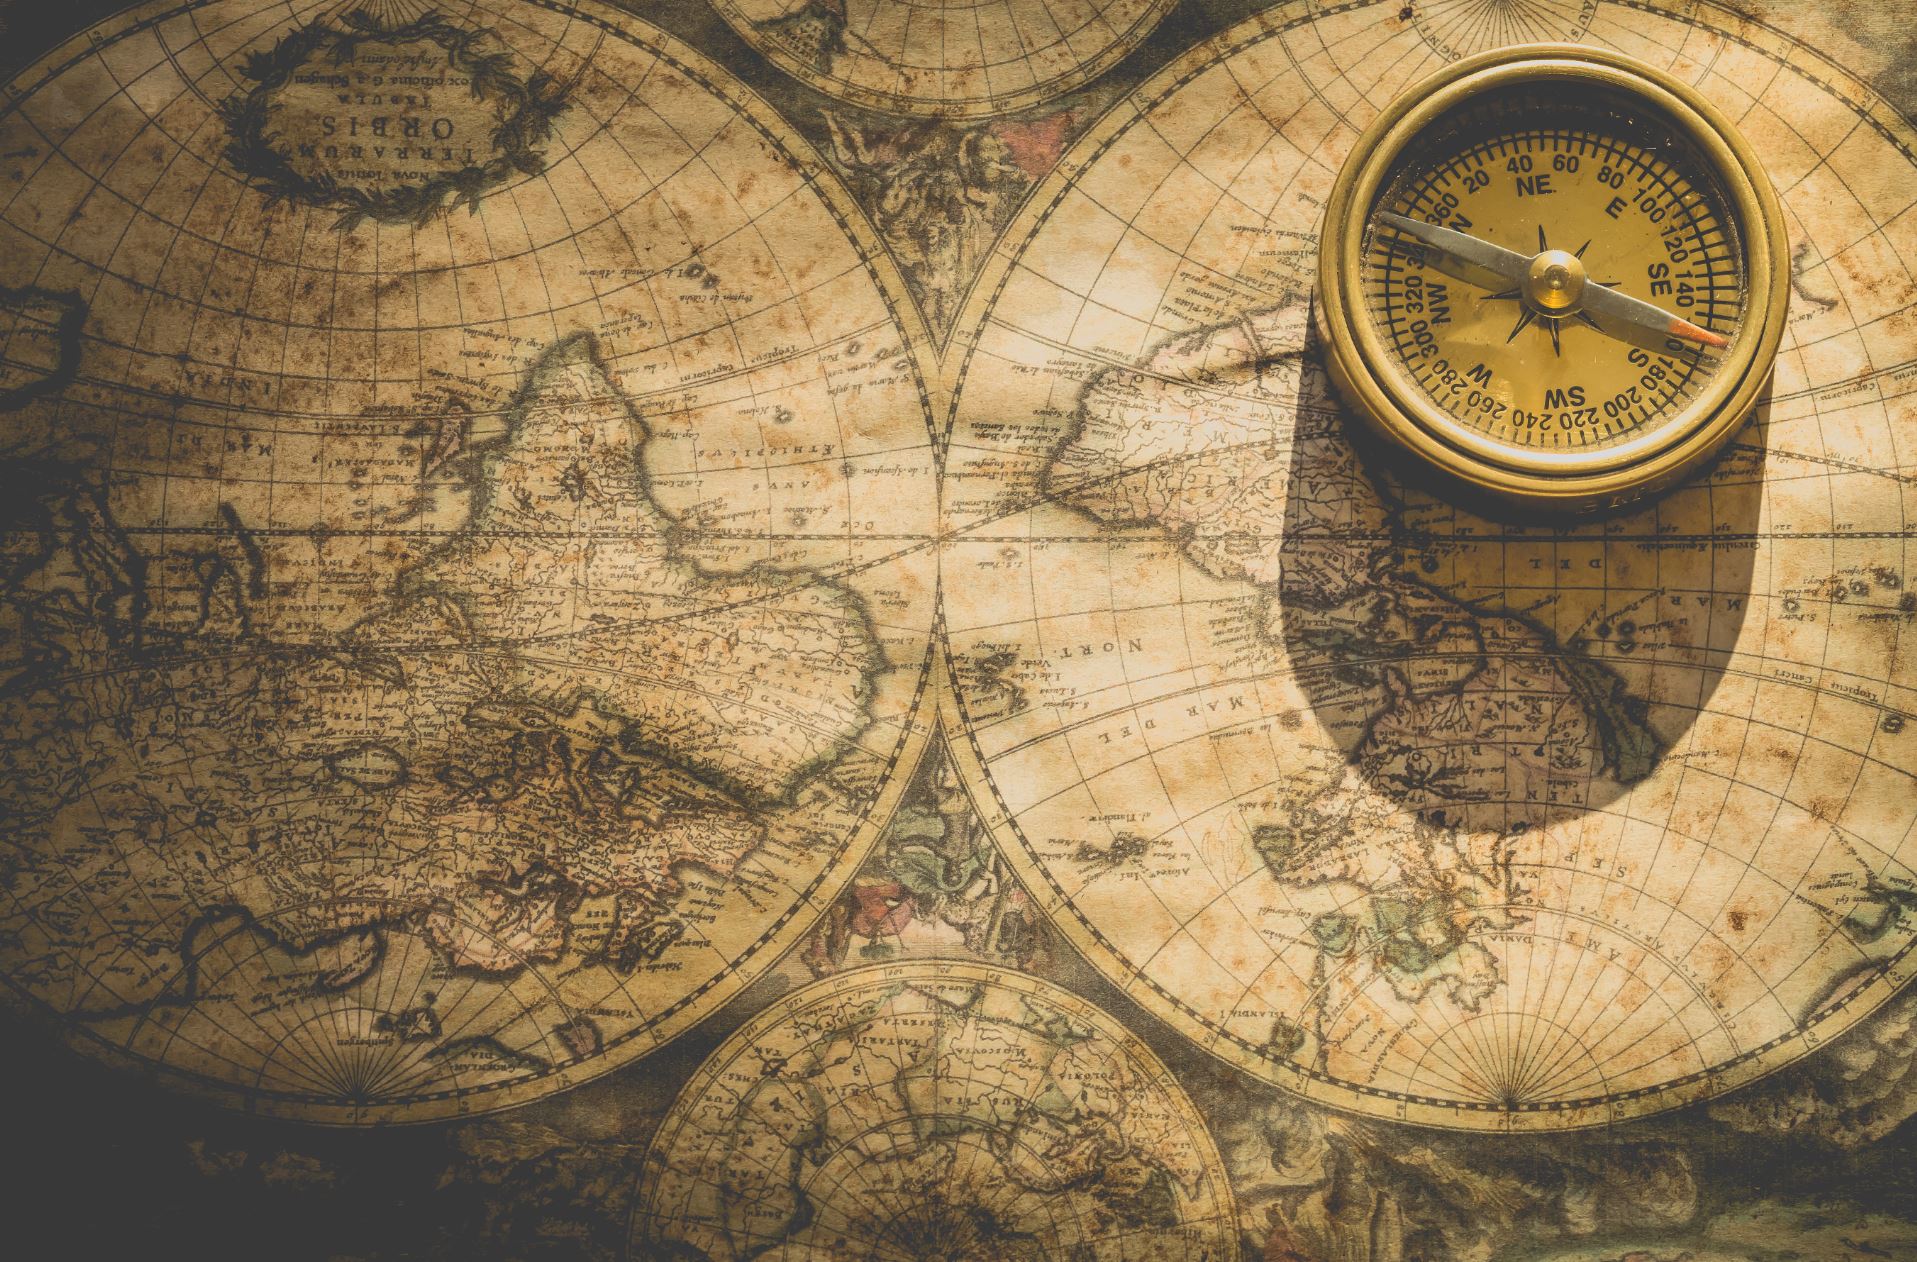 Map and compass. Photo by Ylanite Koppens from Pexels